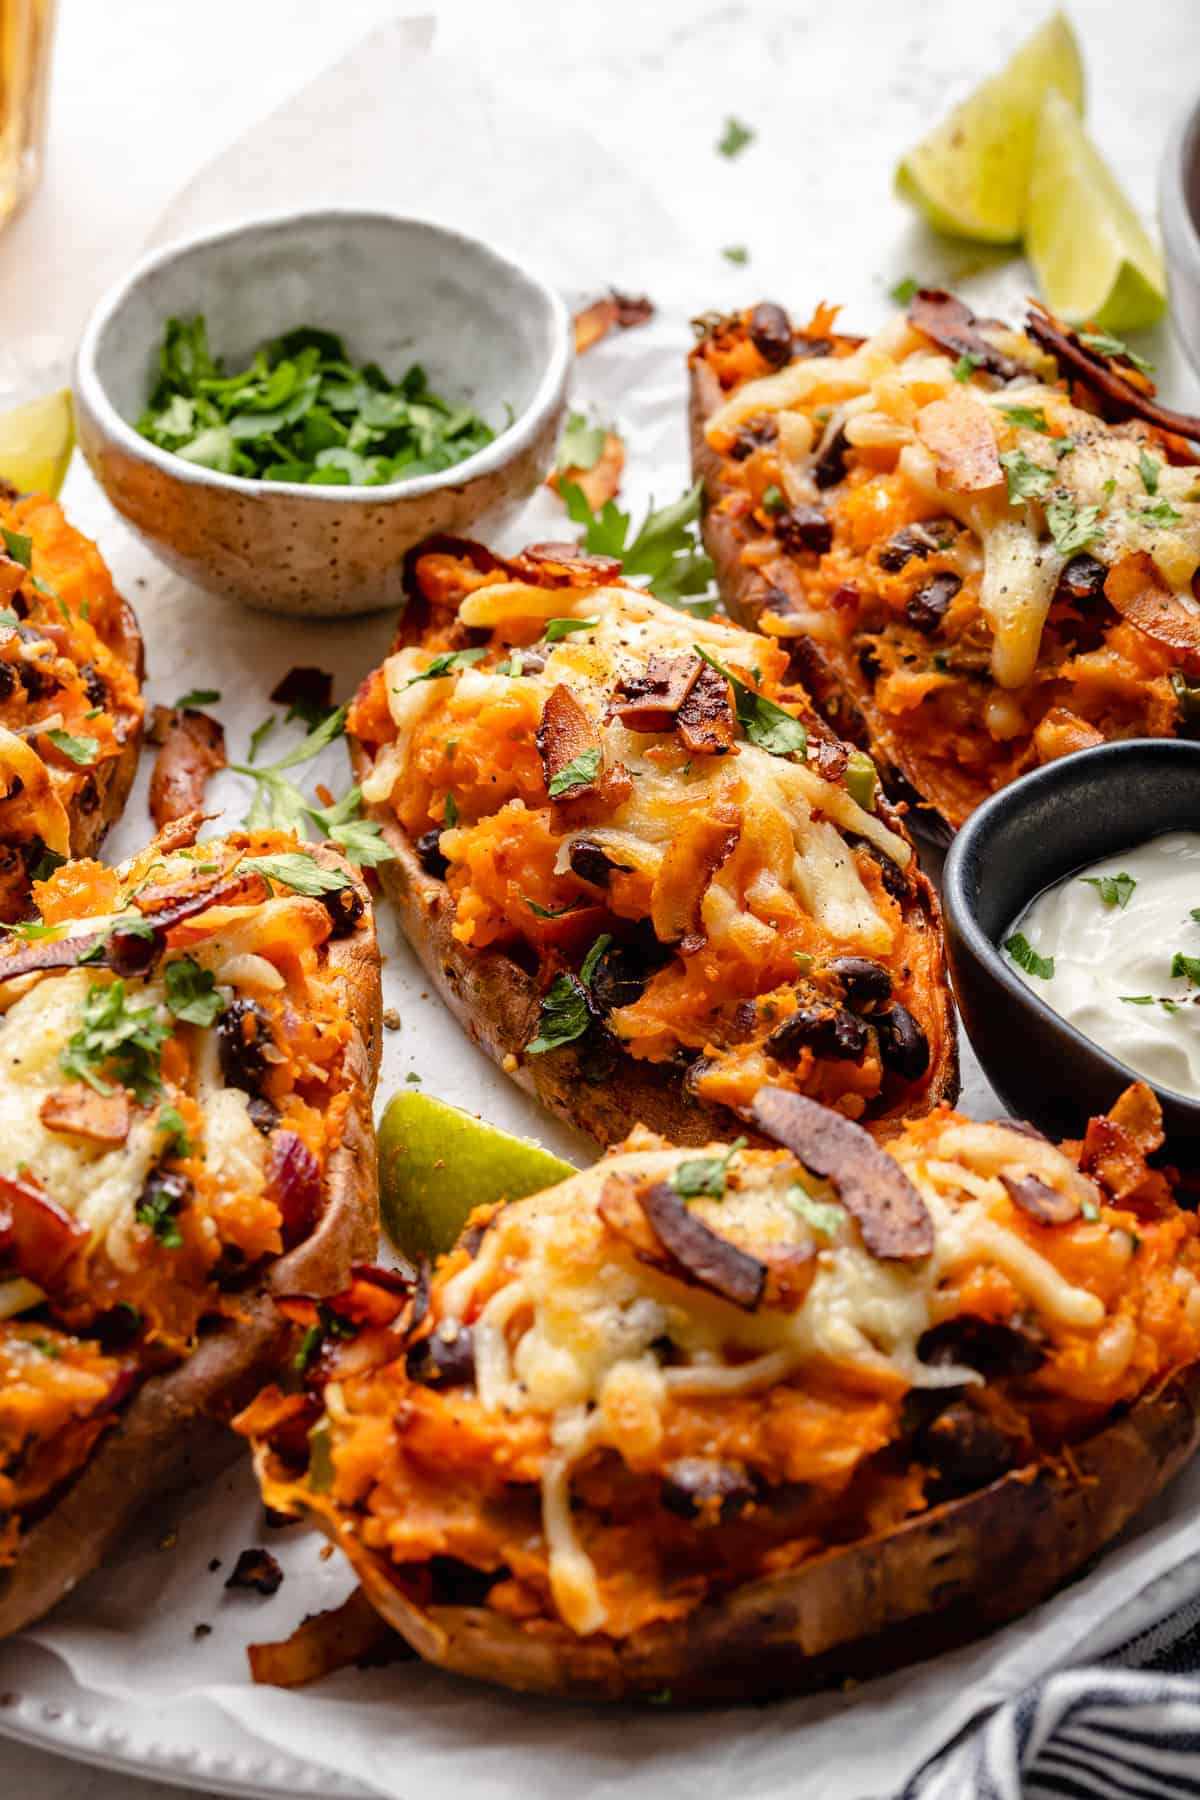 Loaded sweet potato skins on platter with bowls of cilantro and yogurt for garnish